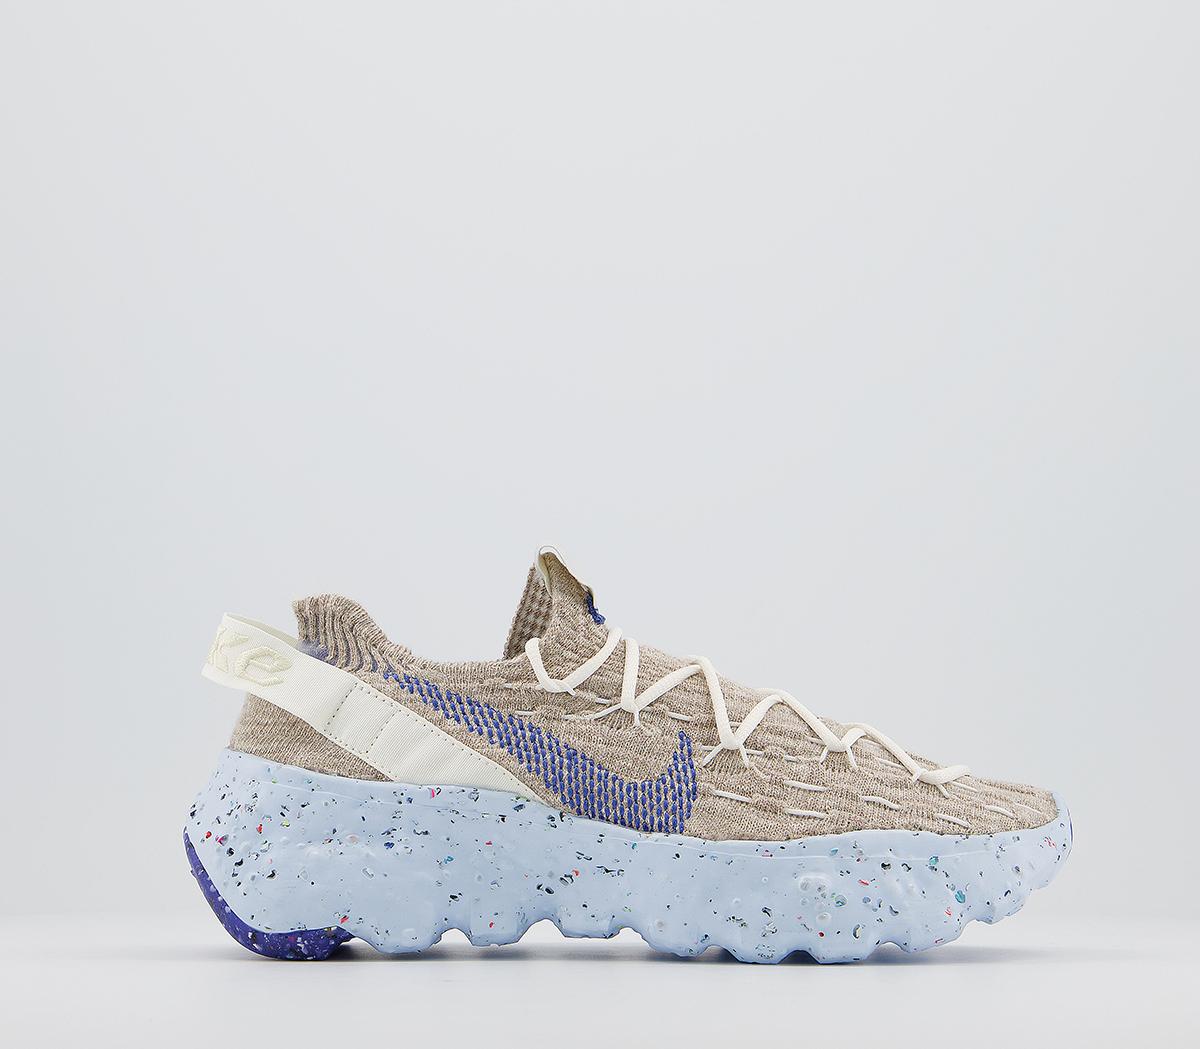 NikeSpace Hippie 4 TrainersSail Astronomy Blue Fossil Blue